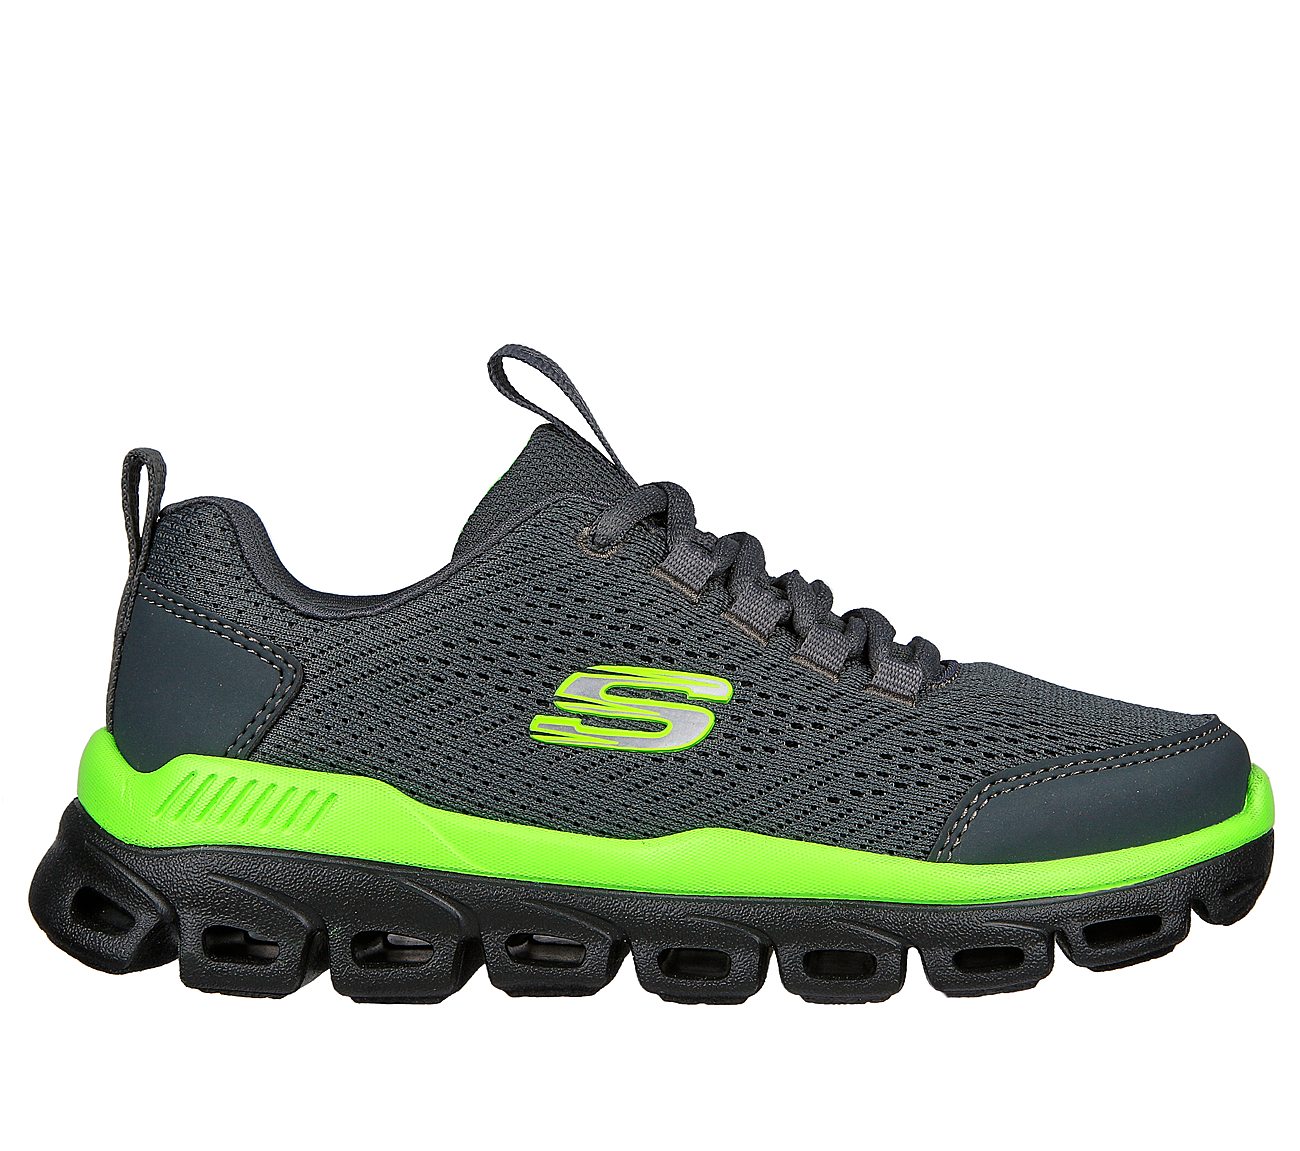 GLIDE-STEP, CHARCOAL/LIME Footwear Lateral View